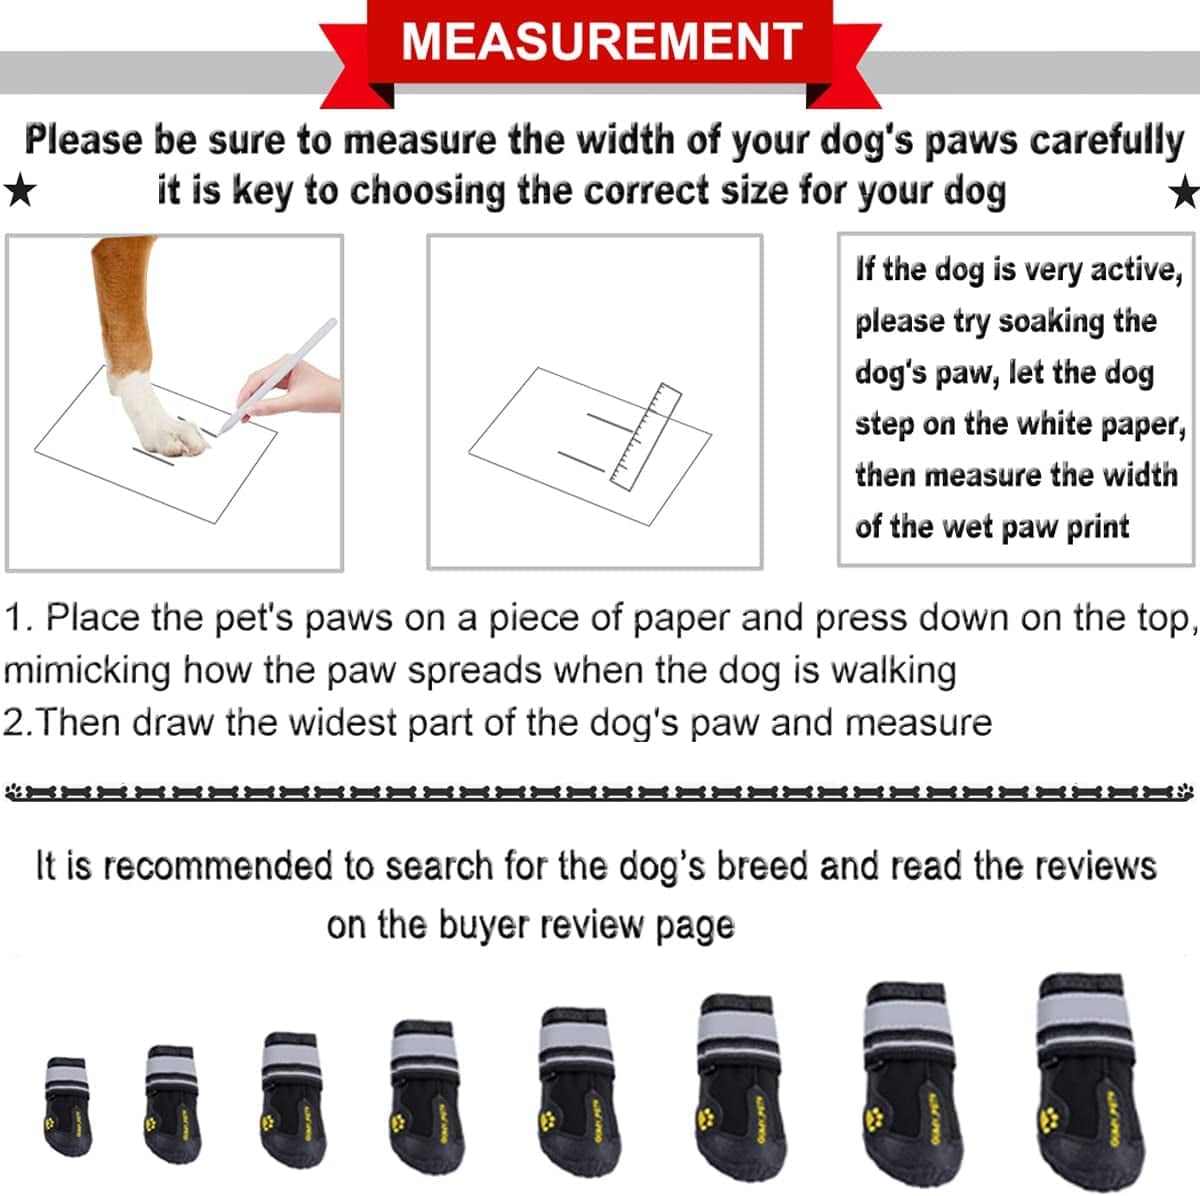 QUMY Dog Shoes for Large Dogs, Medium Dog Boots & Paw Protectors for Winter Snowy Day, Summer Hot Pavement, Waterproof in Rainy Weather, Outdoor Walking, Indoor Hardfloors anti Slip Sole Black Size 6